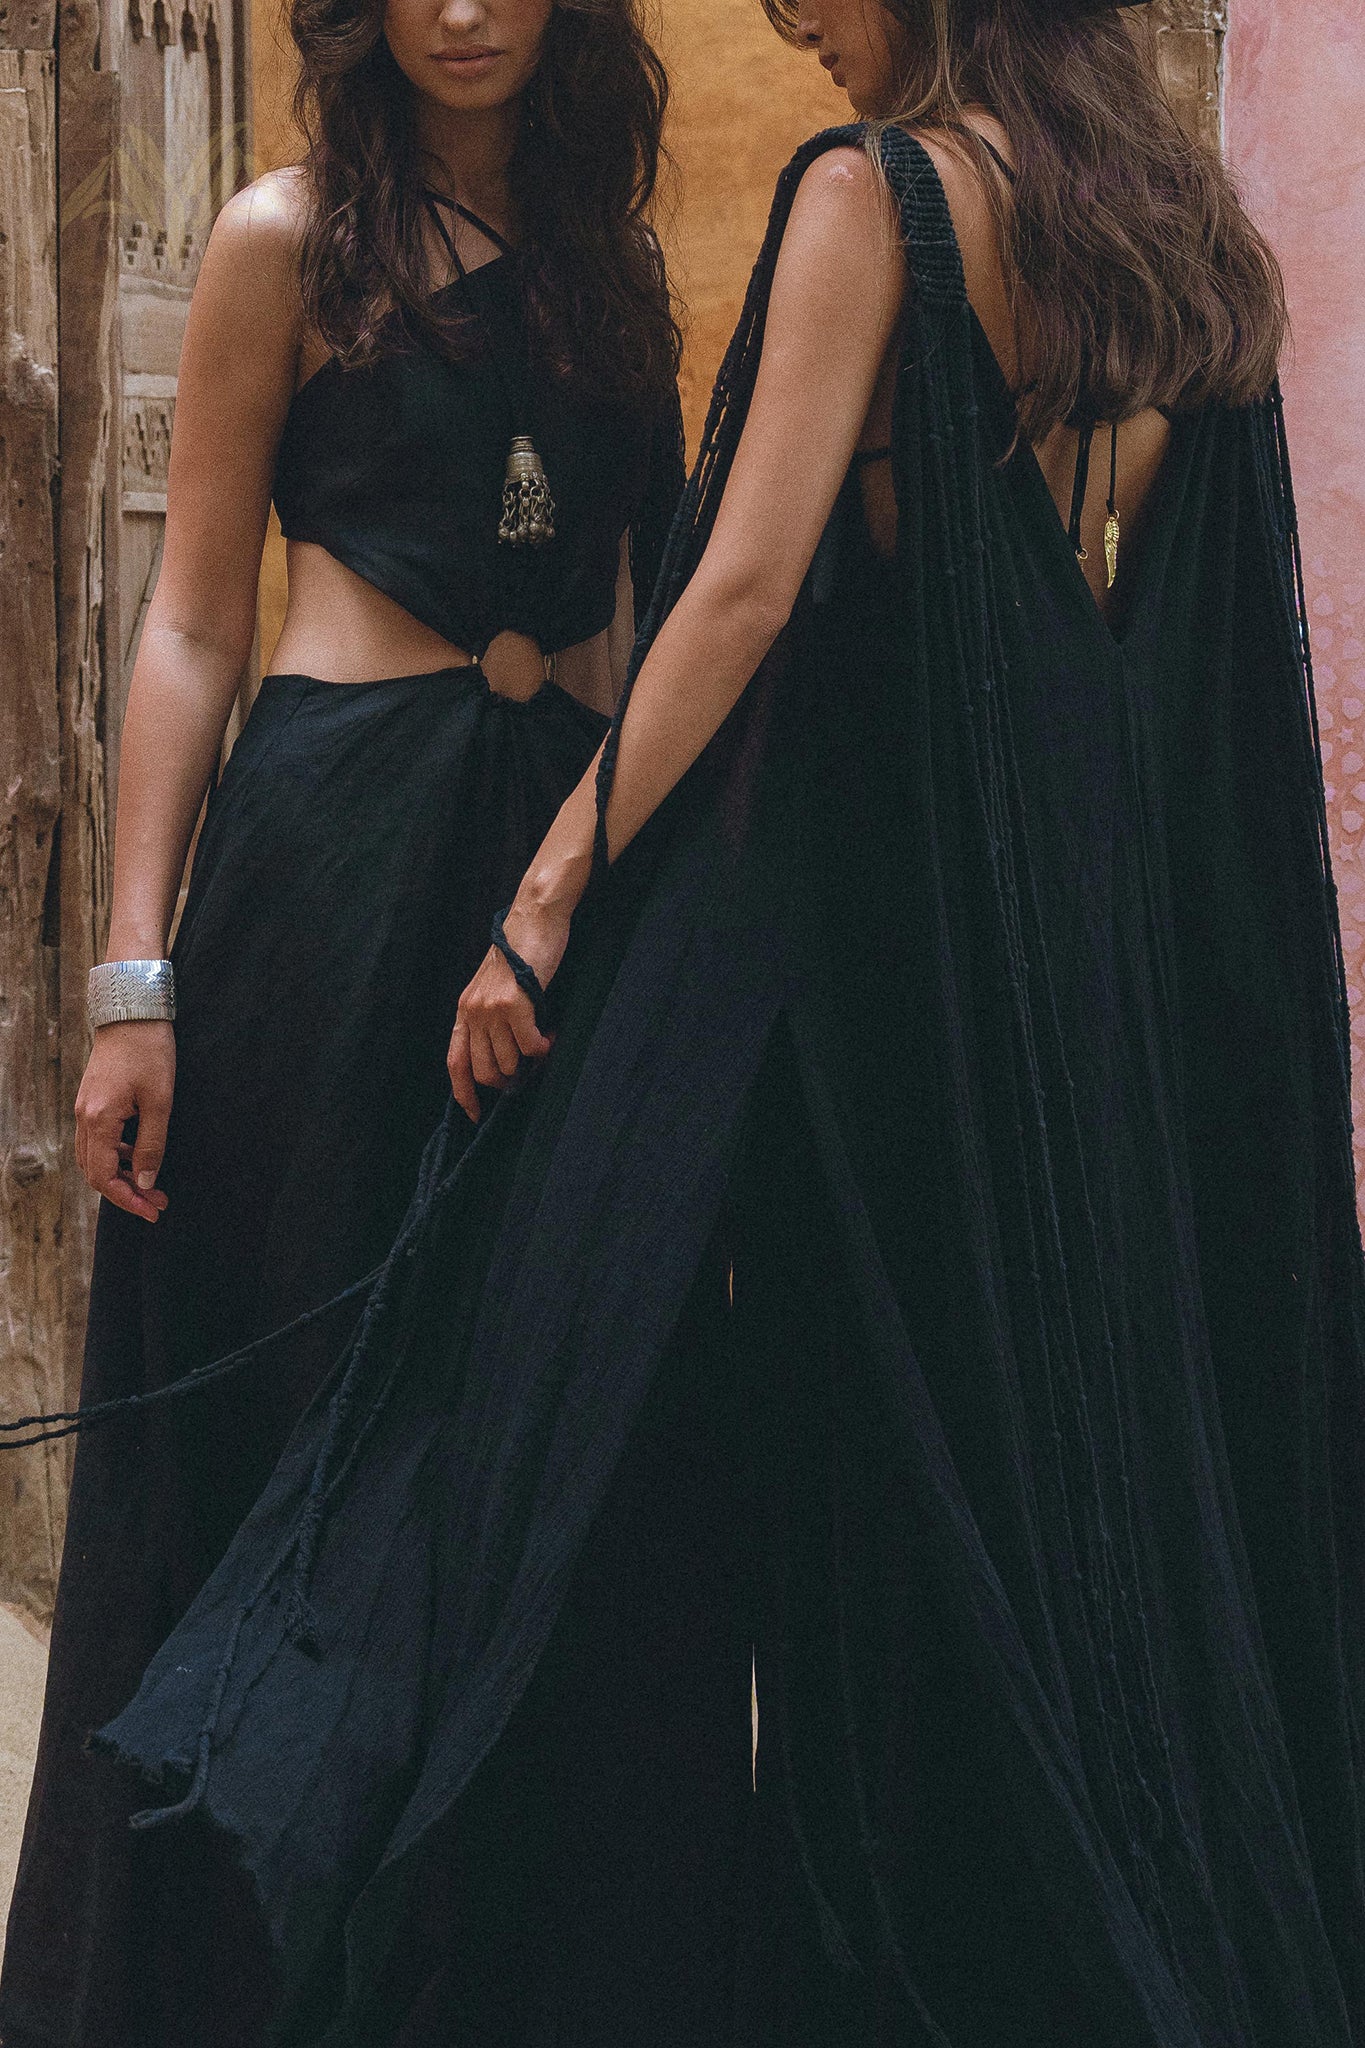 Feel divine in this stunning black cape dress by Aya Sacred Wear.